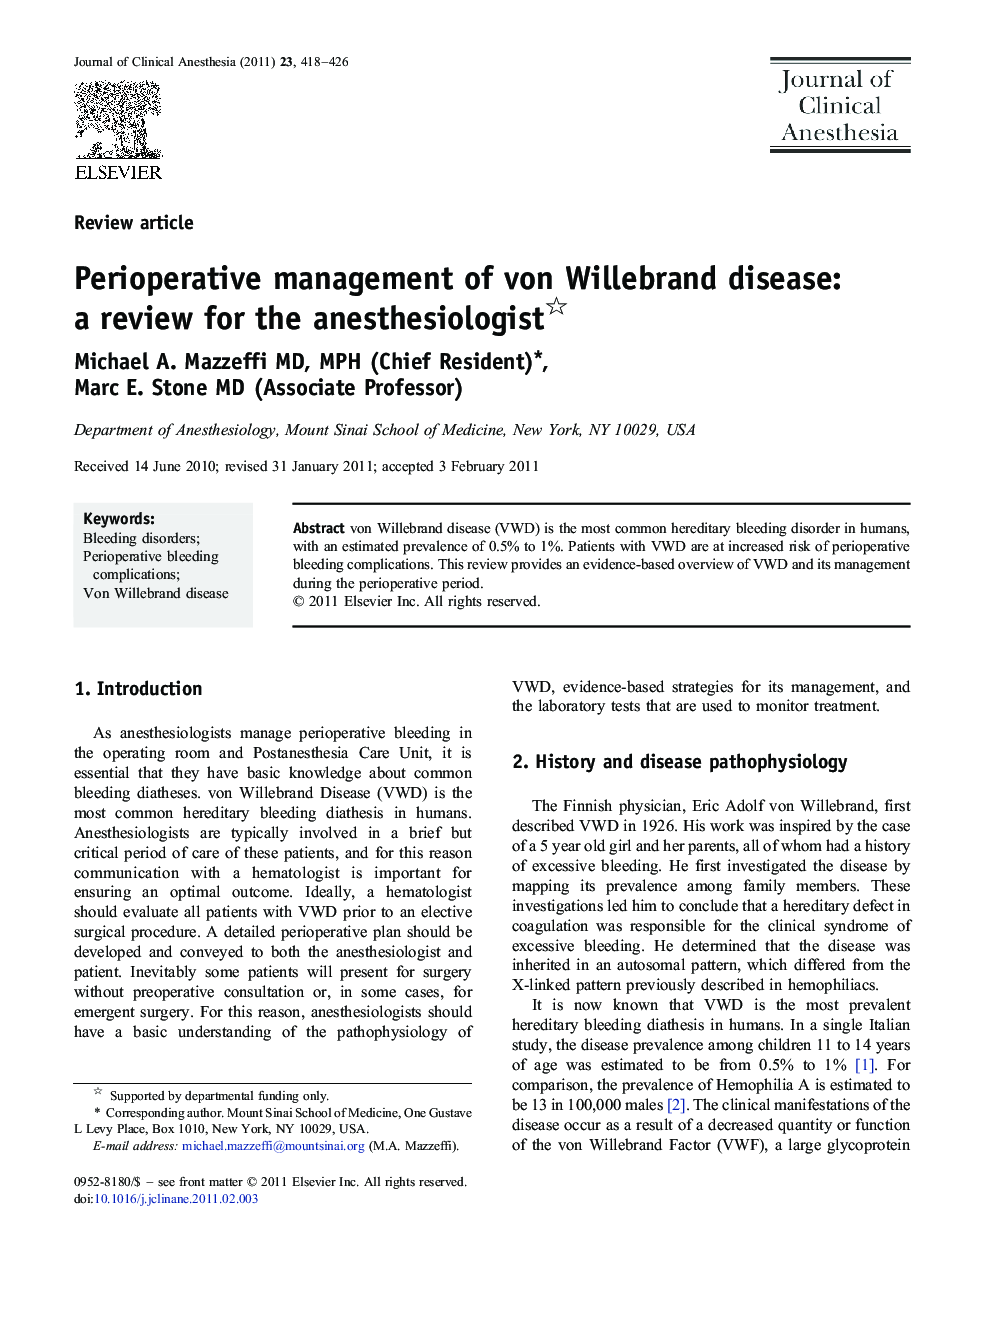 Perioperative management of von Willebrand disease: a review for the anesthesiologist 